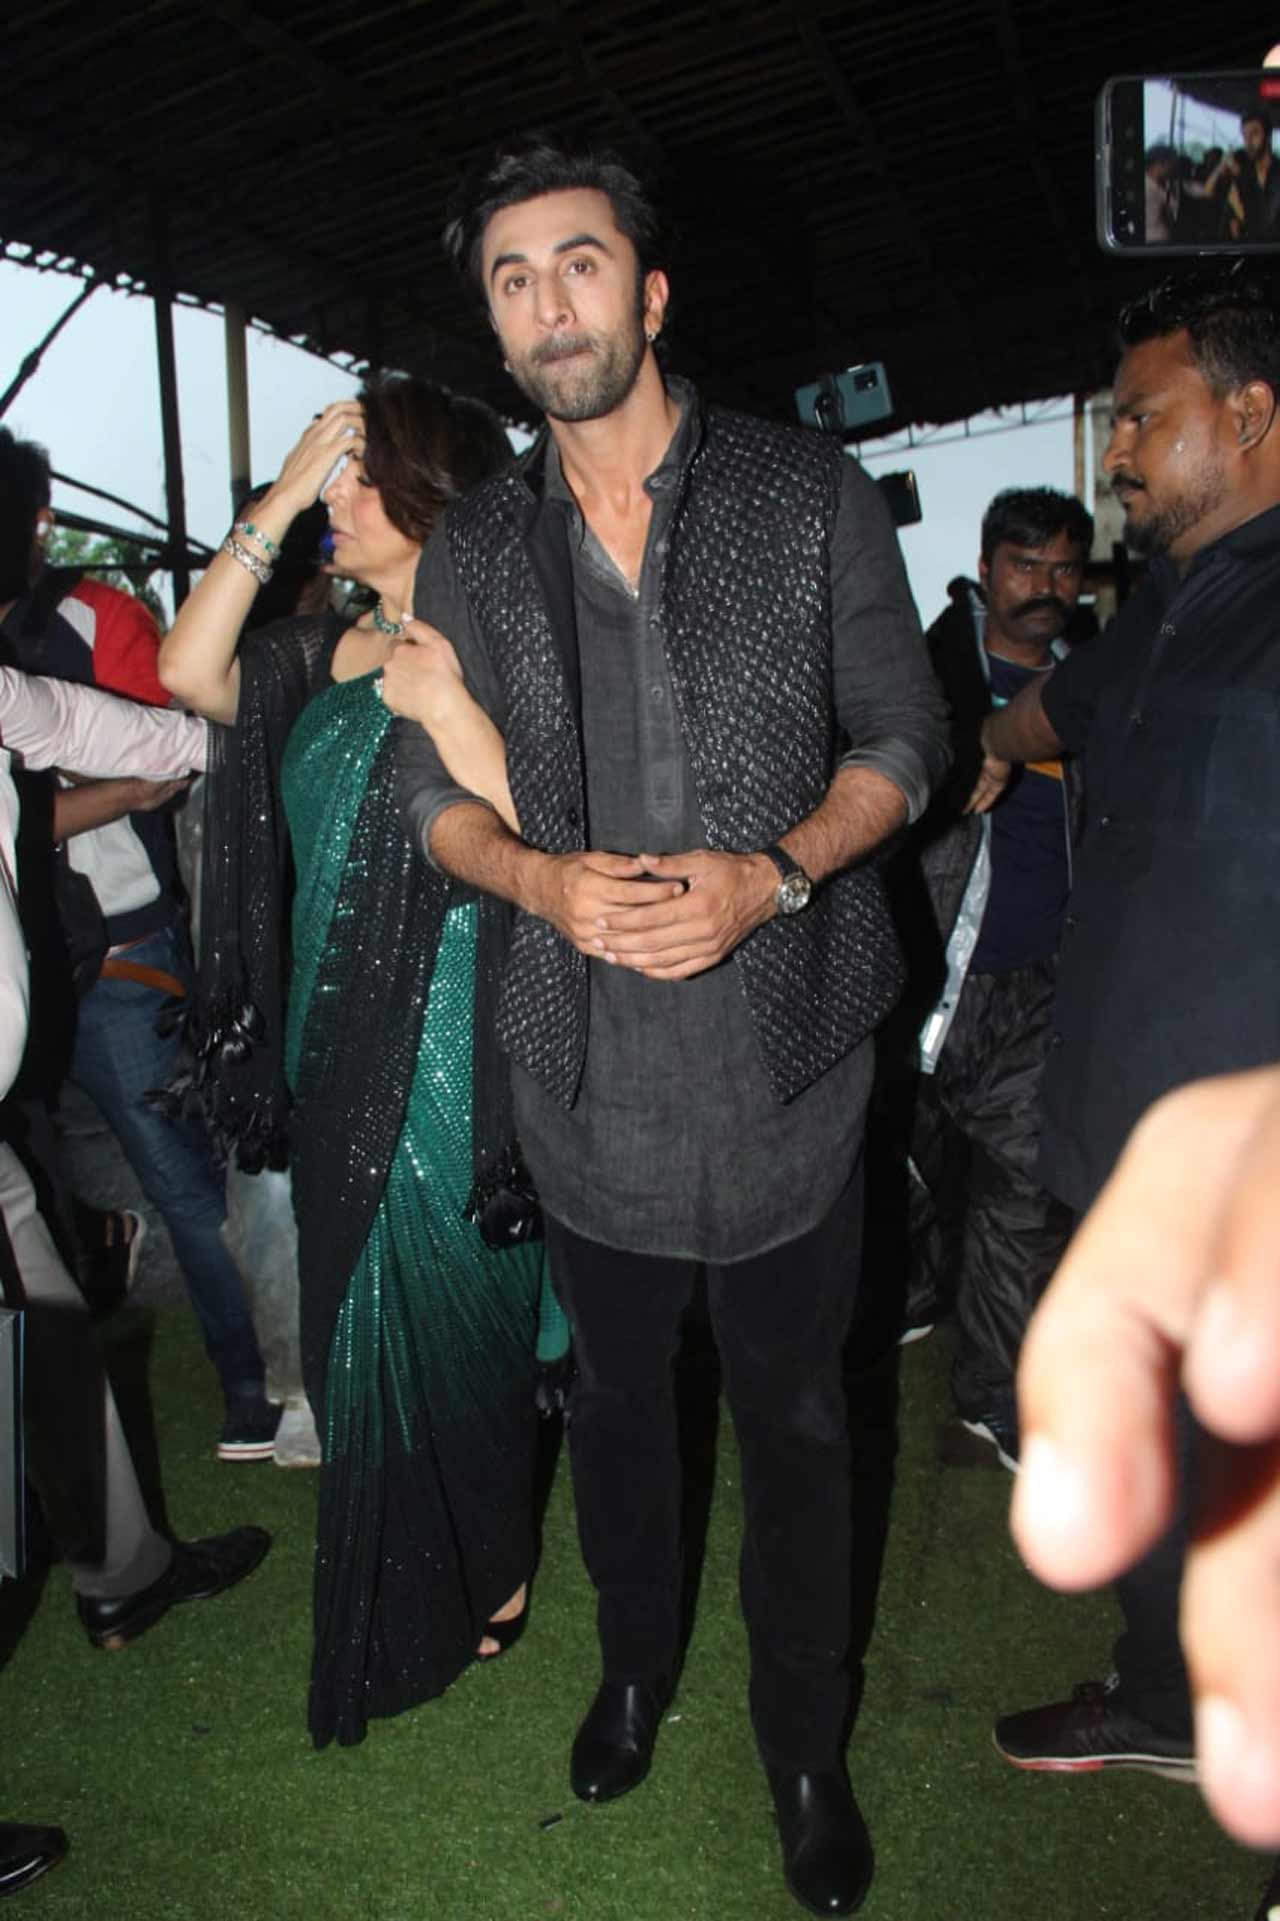 The promotional event for the film has already started. This time, Ranbir, along with his co-star Vaani Kapoor, attended the dance reality show - Dance Deewane Juniors, to promote the movie. While Ranbir opted for a black sherwani, his mom Neetu Kapoor stunned in a sequin ombre saree